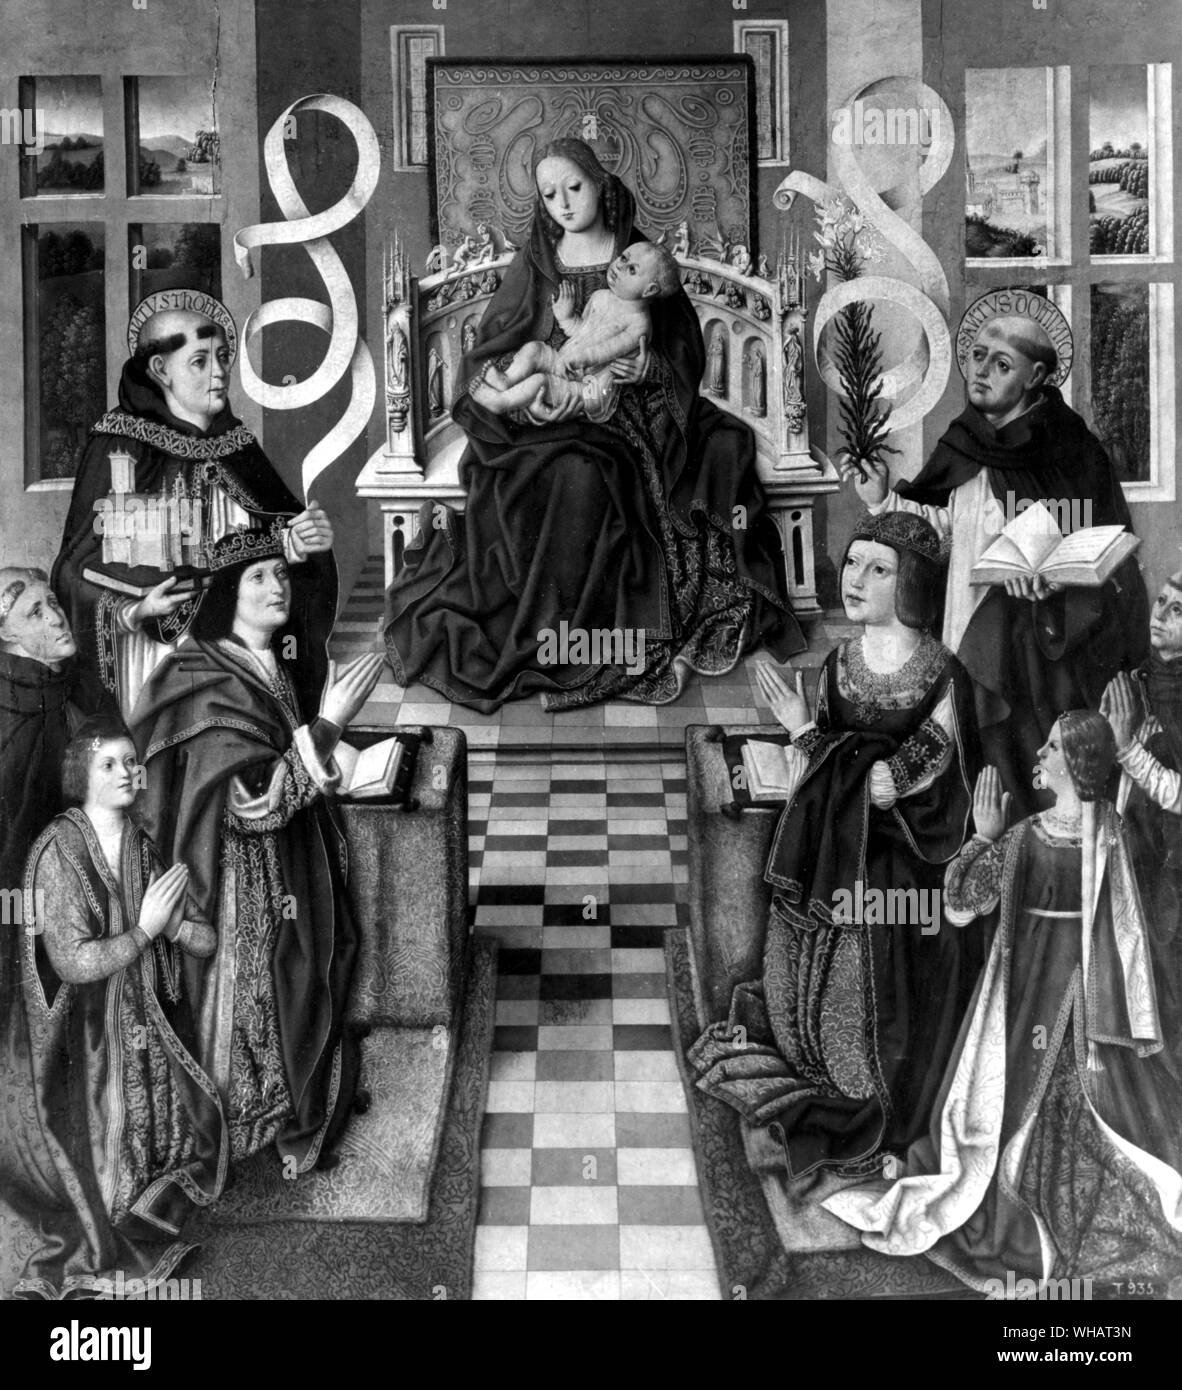 Virgin and the Catholic Kings. On left, St Thomas, King Ferdinand V of Aragon, Prince Don Juan, Tomas de Torquemada. On the right, St D? (Domime?) Queen Isabella, Princess Dona Isabel ? Stock Photo